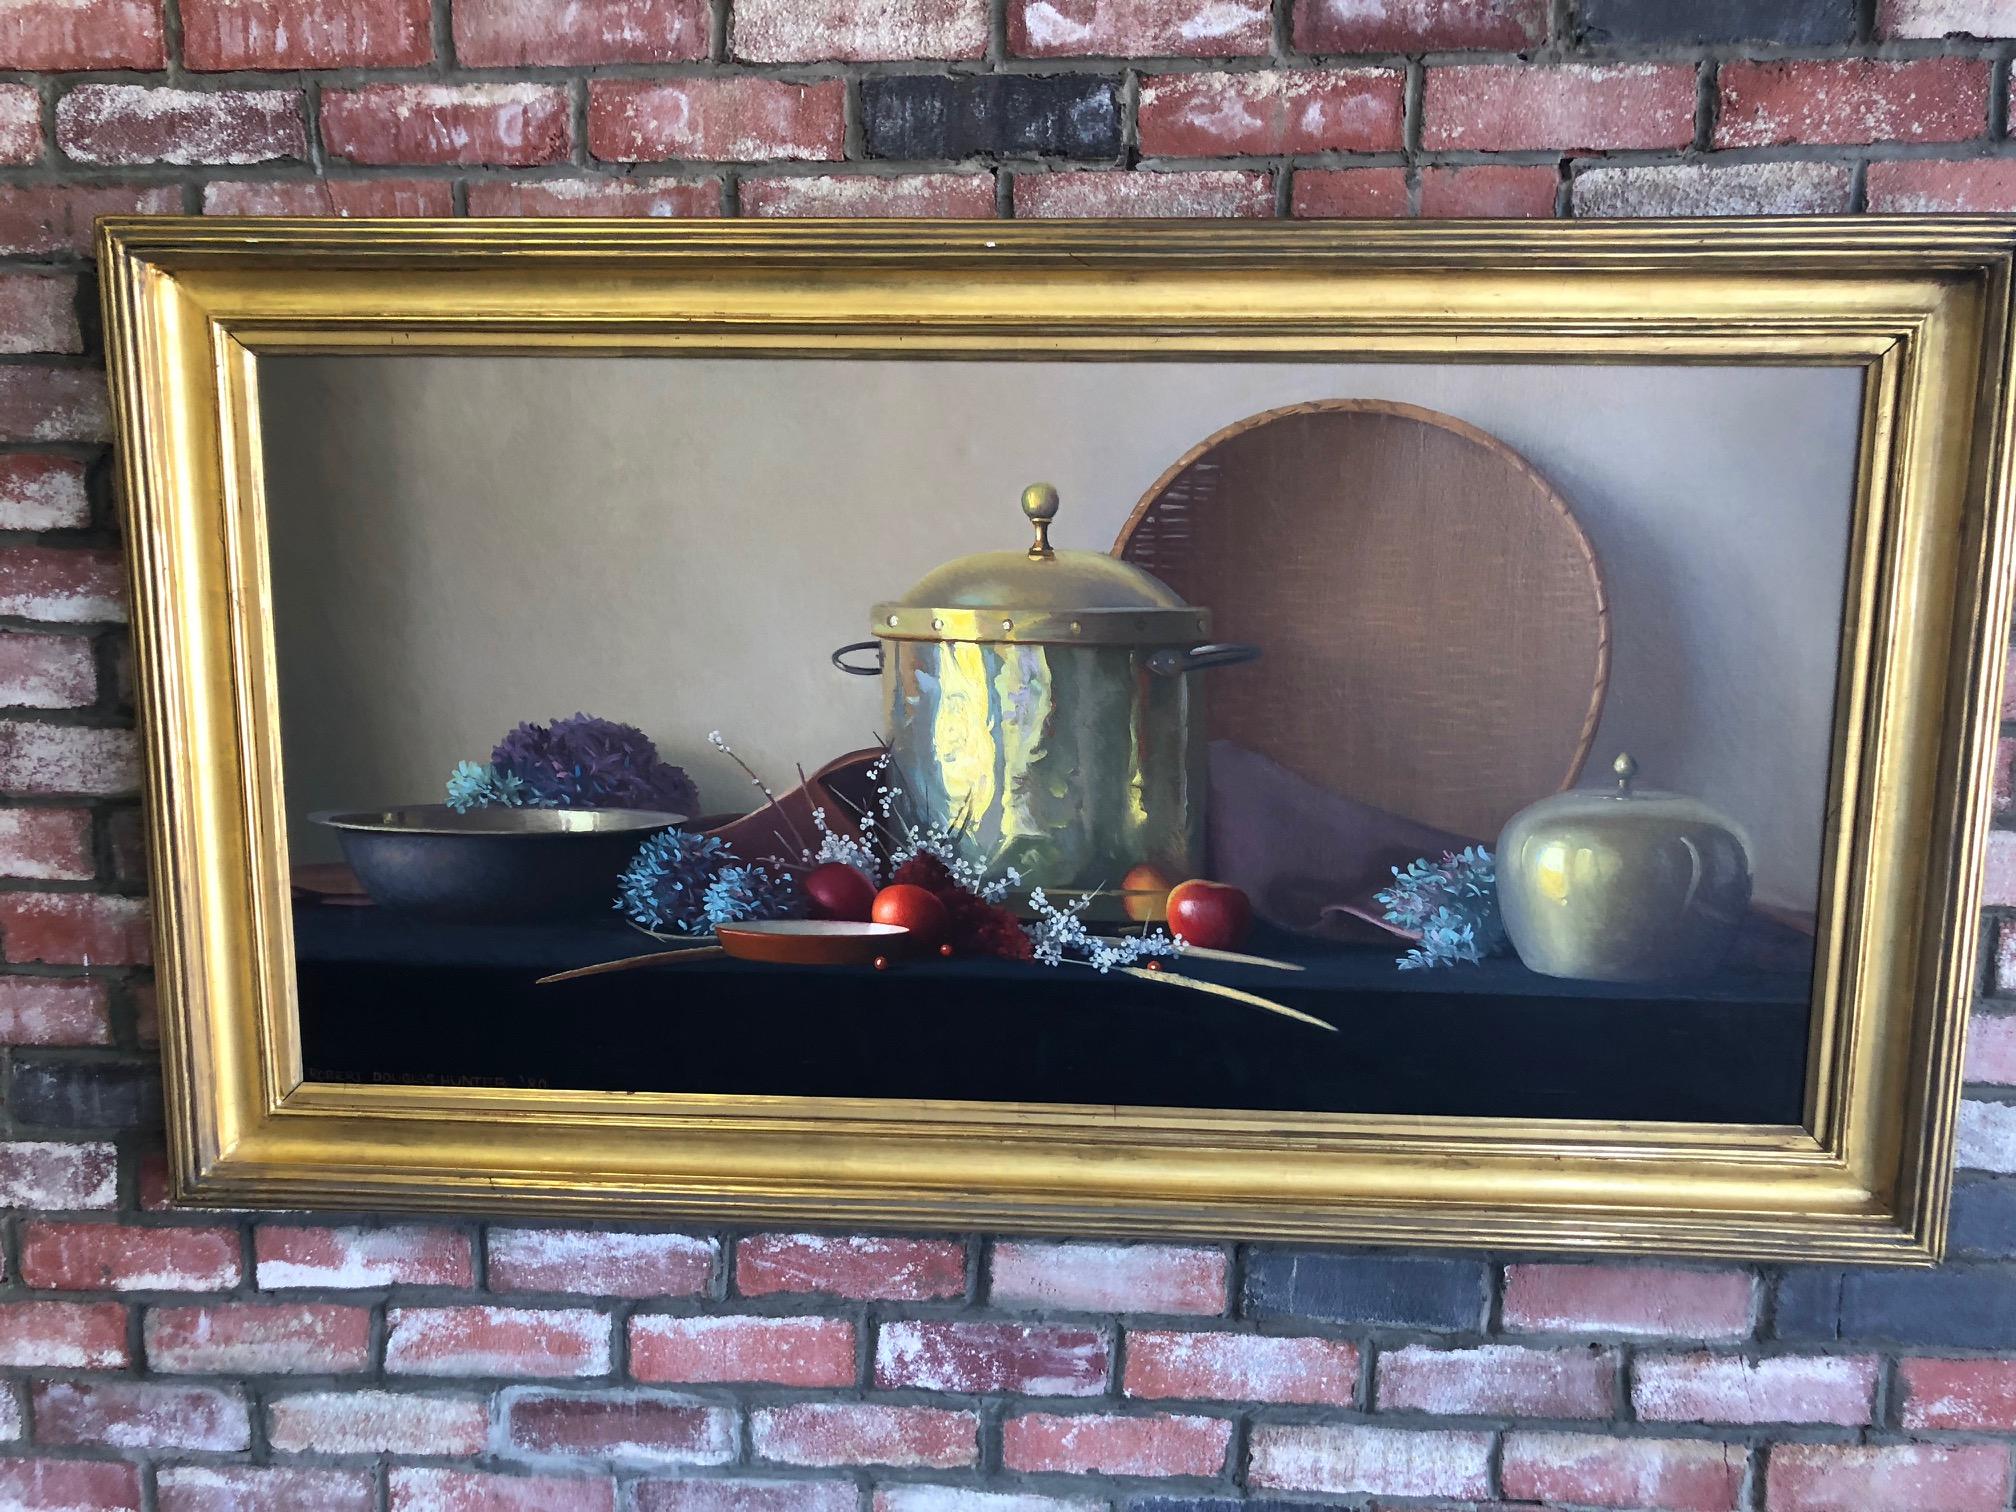 Original still life in oil on canvas by noted artist Robert Douglas Hunter, circa 1980.

Robert Douglas Hunter (1928-2014) From Boston, Massachusetts, Robert Hunter is a classical-realist painter who studied and then taught at the Vesper George